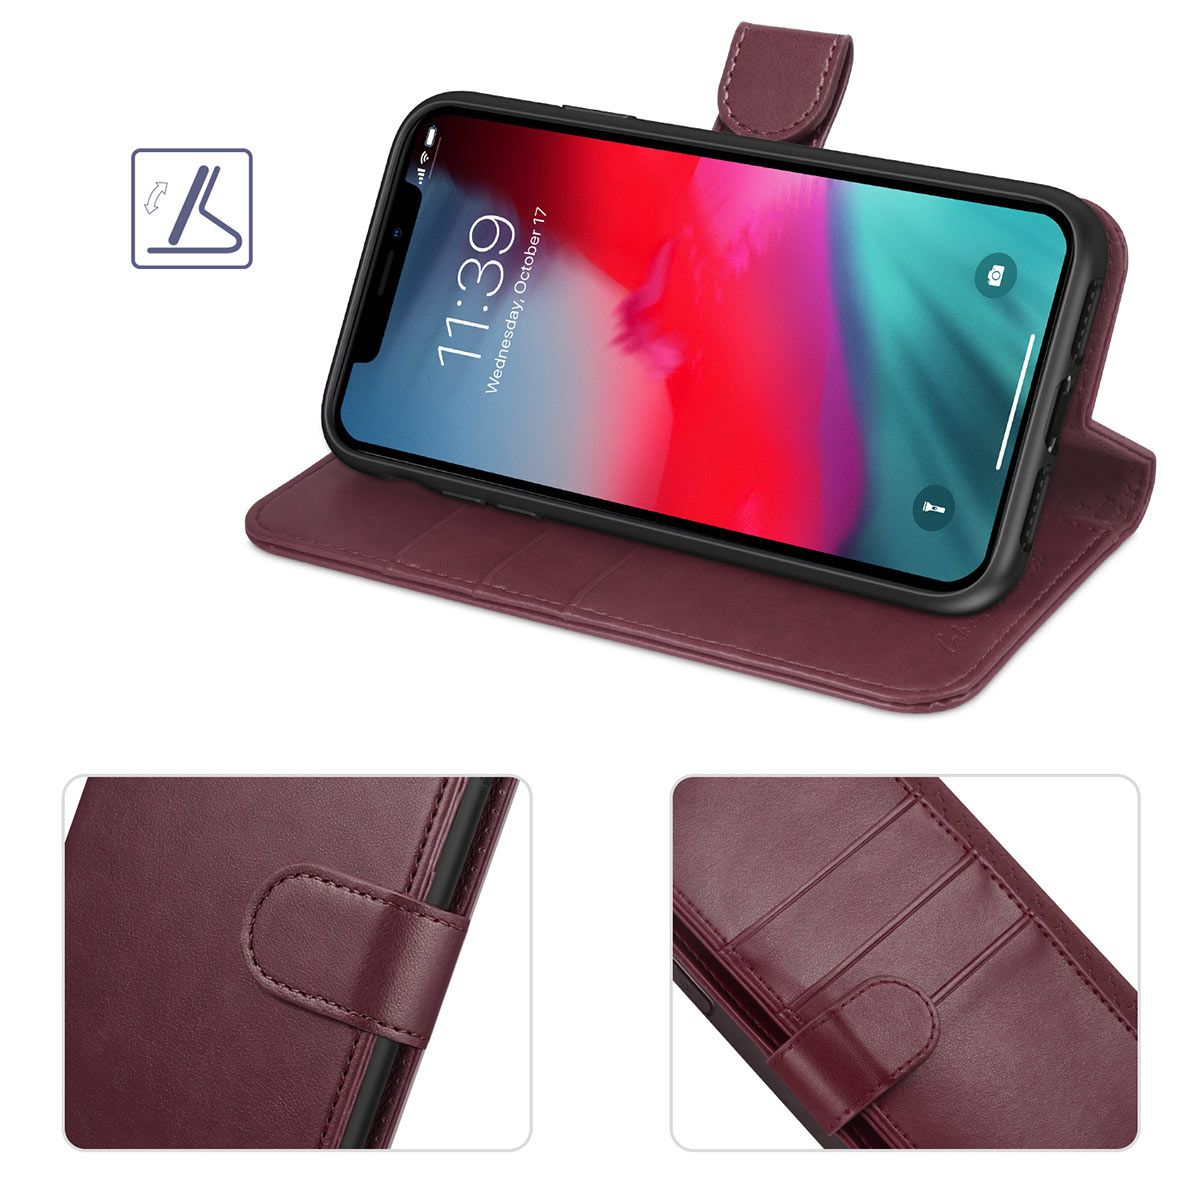 TUCCH iPhone XR Wallet Case - iPhone 10R Leather Case Cover with Stand, Flip Style, Magnetic ...